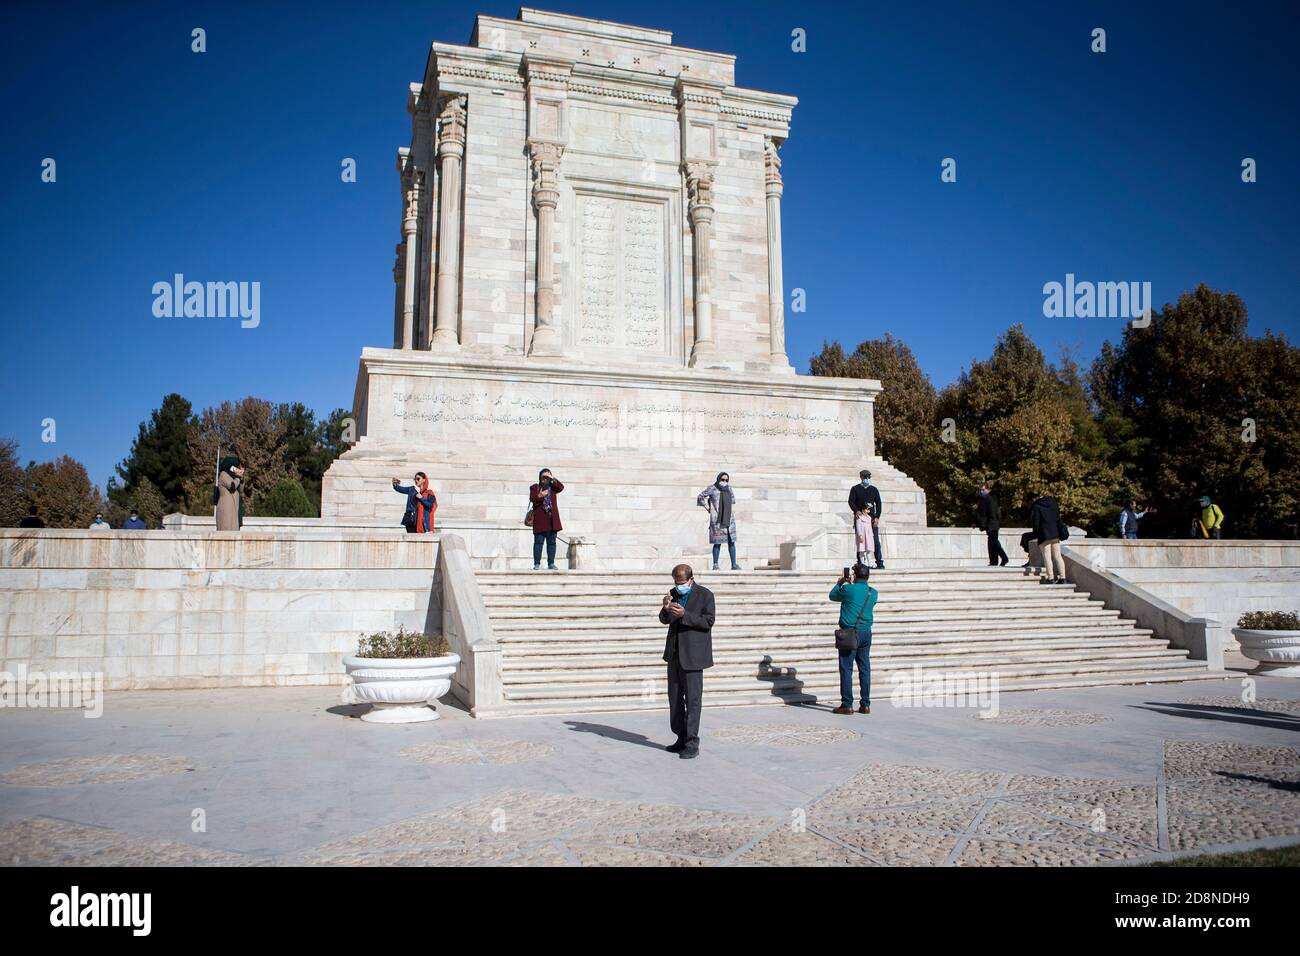 Tehran, Iran. 30th Oct, 2020. People wearing face masks visit the tomb of Persian poet Ferdowsi in ancient city of Tous, Iran, Oct. 30, 2020. Ferdowsi was a Persian poet and the author of Shahnameh, which is one of the world's longest epic poems created by a single poet. Credit: Ahmad Halabisaz/Xinhua/Alamy Live News Stock Photo